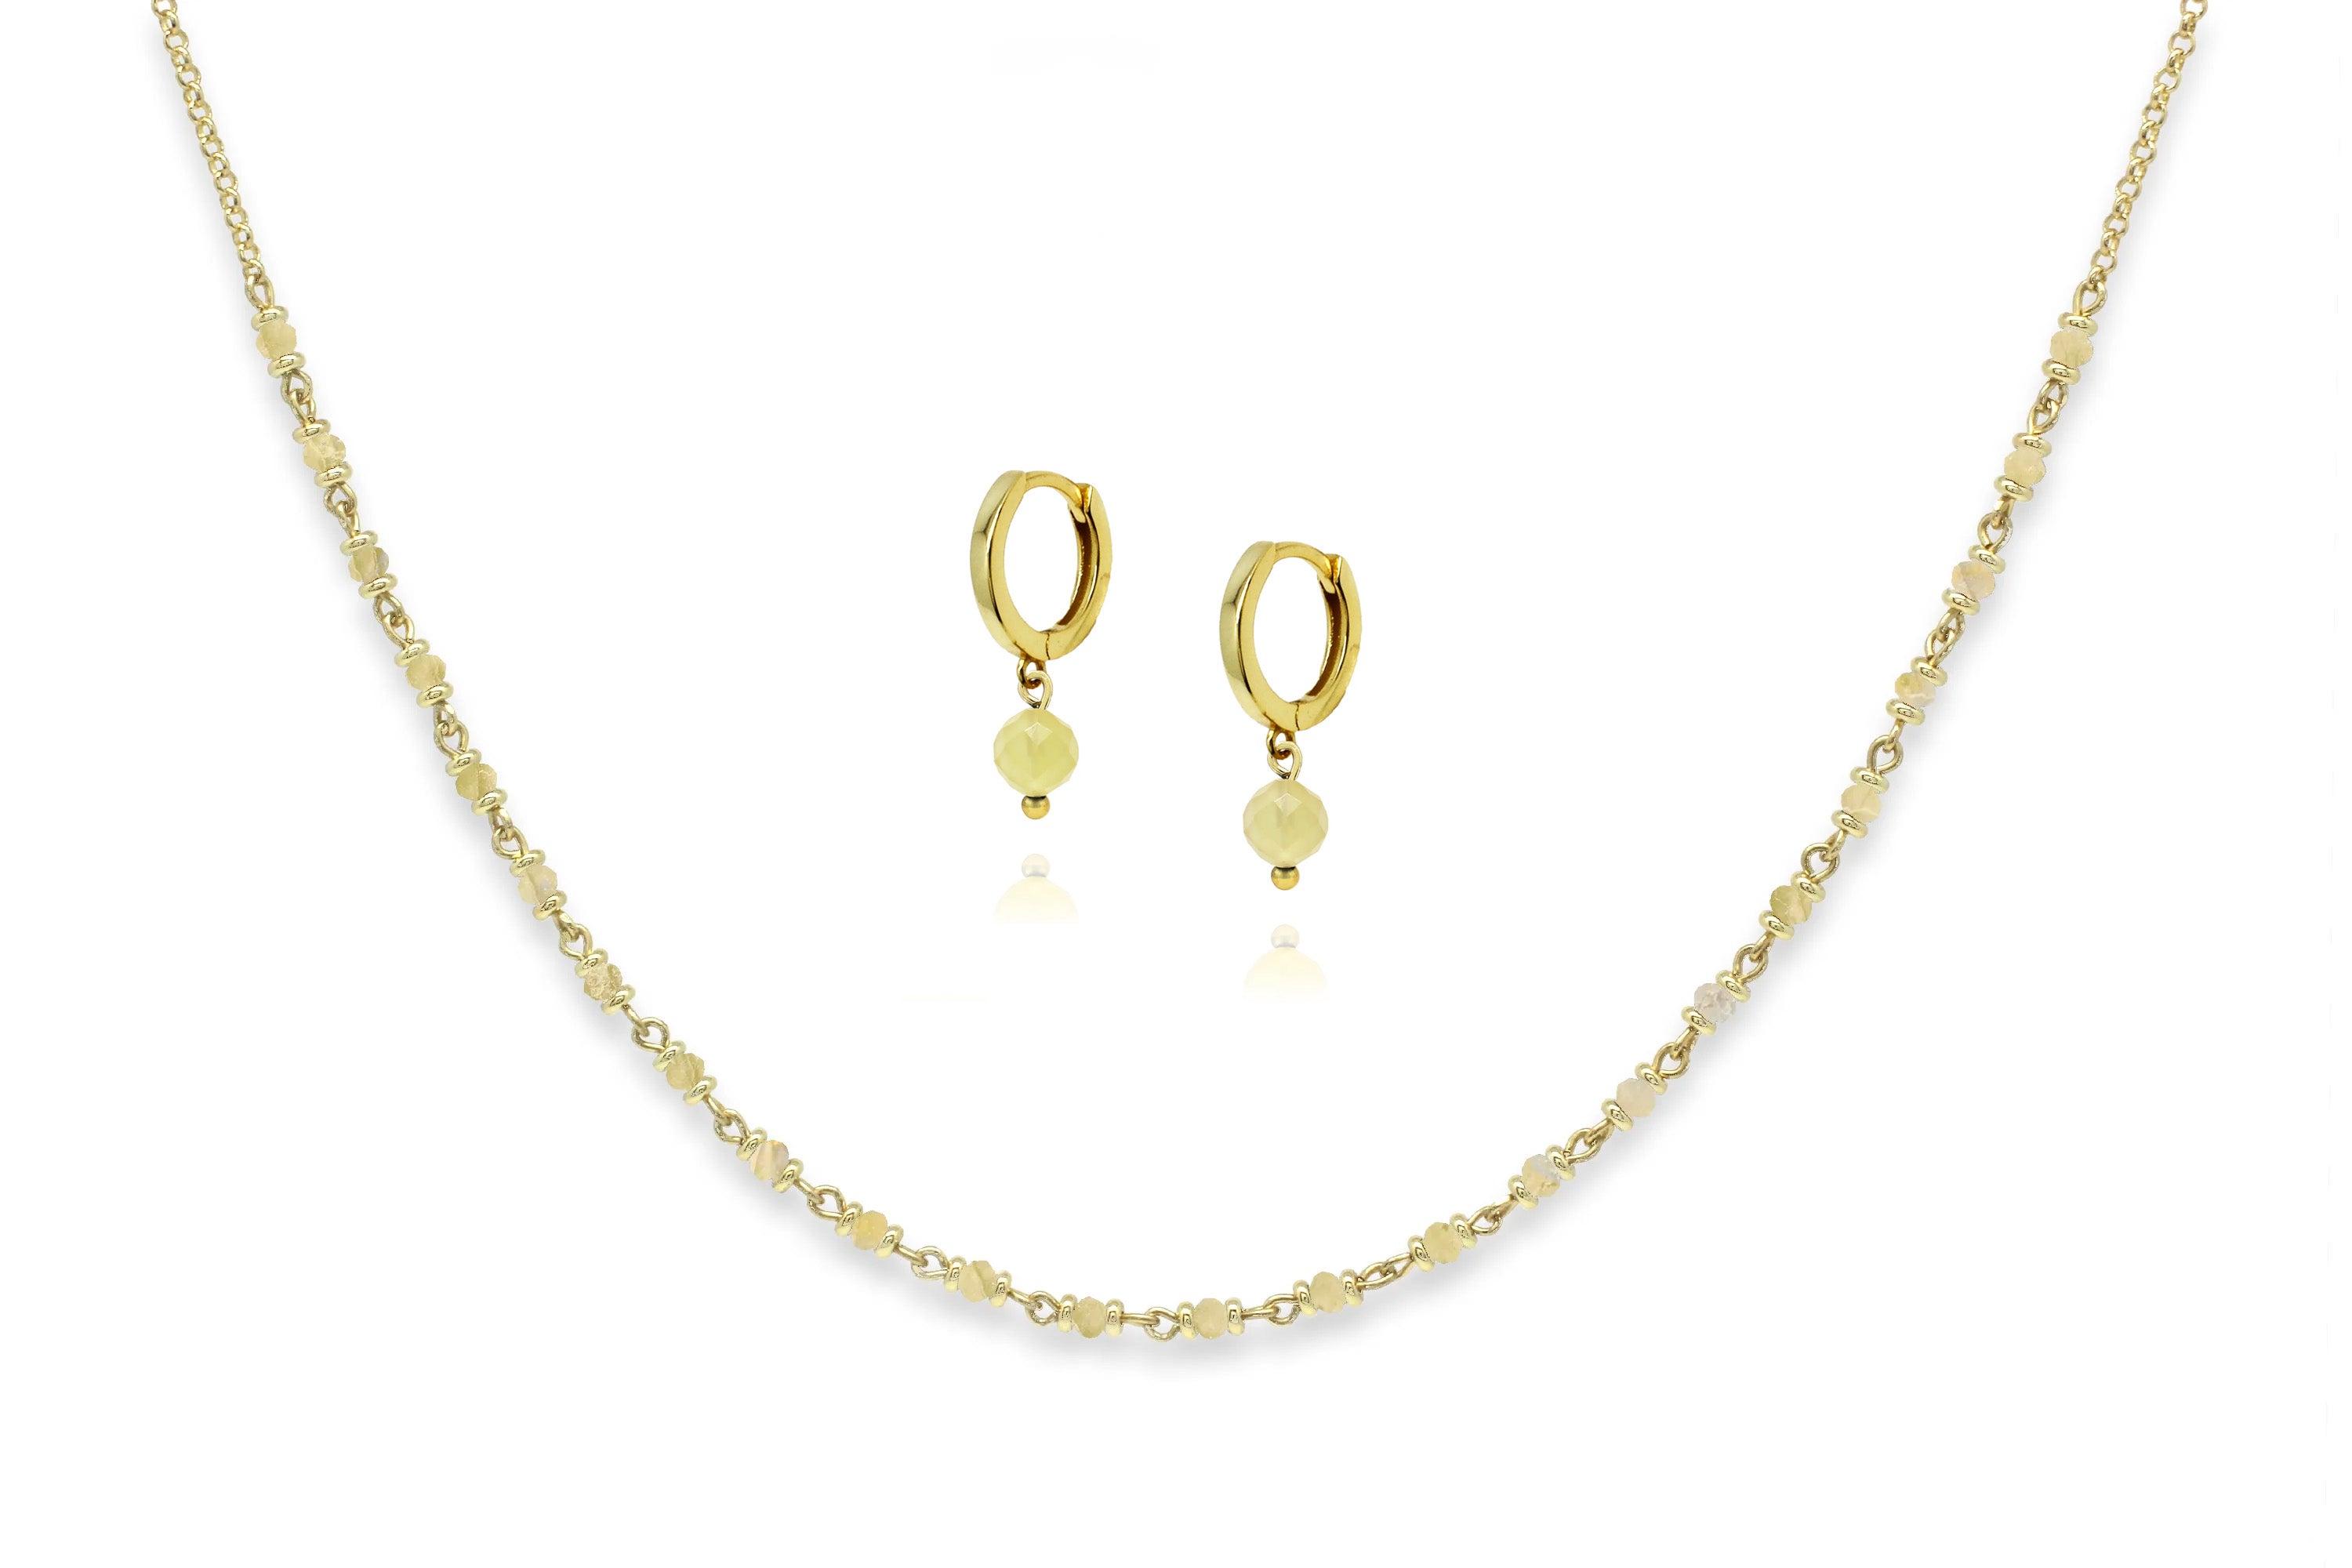 Panacea Gold Necklace & Earring Gift Set ty #color_Citrine